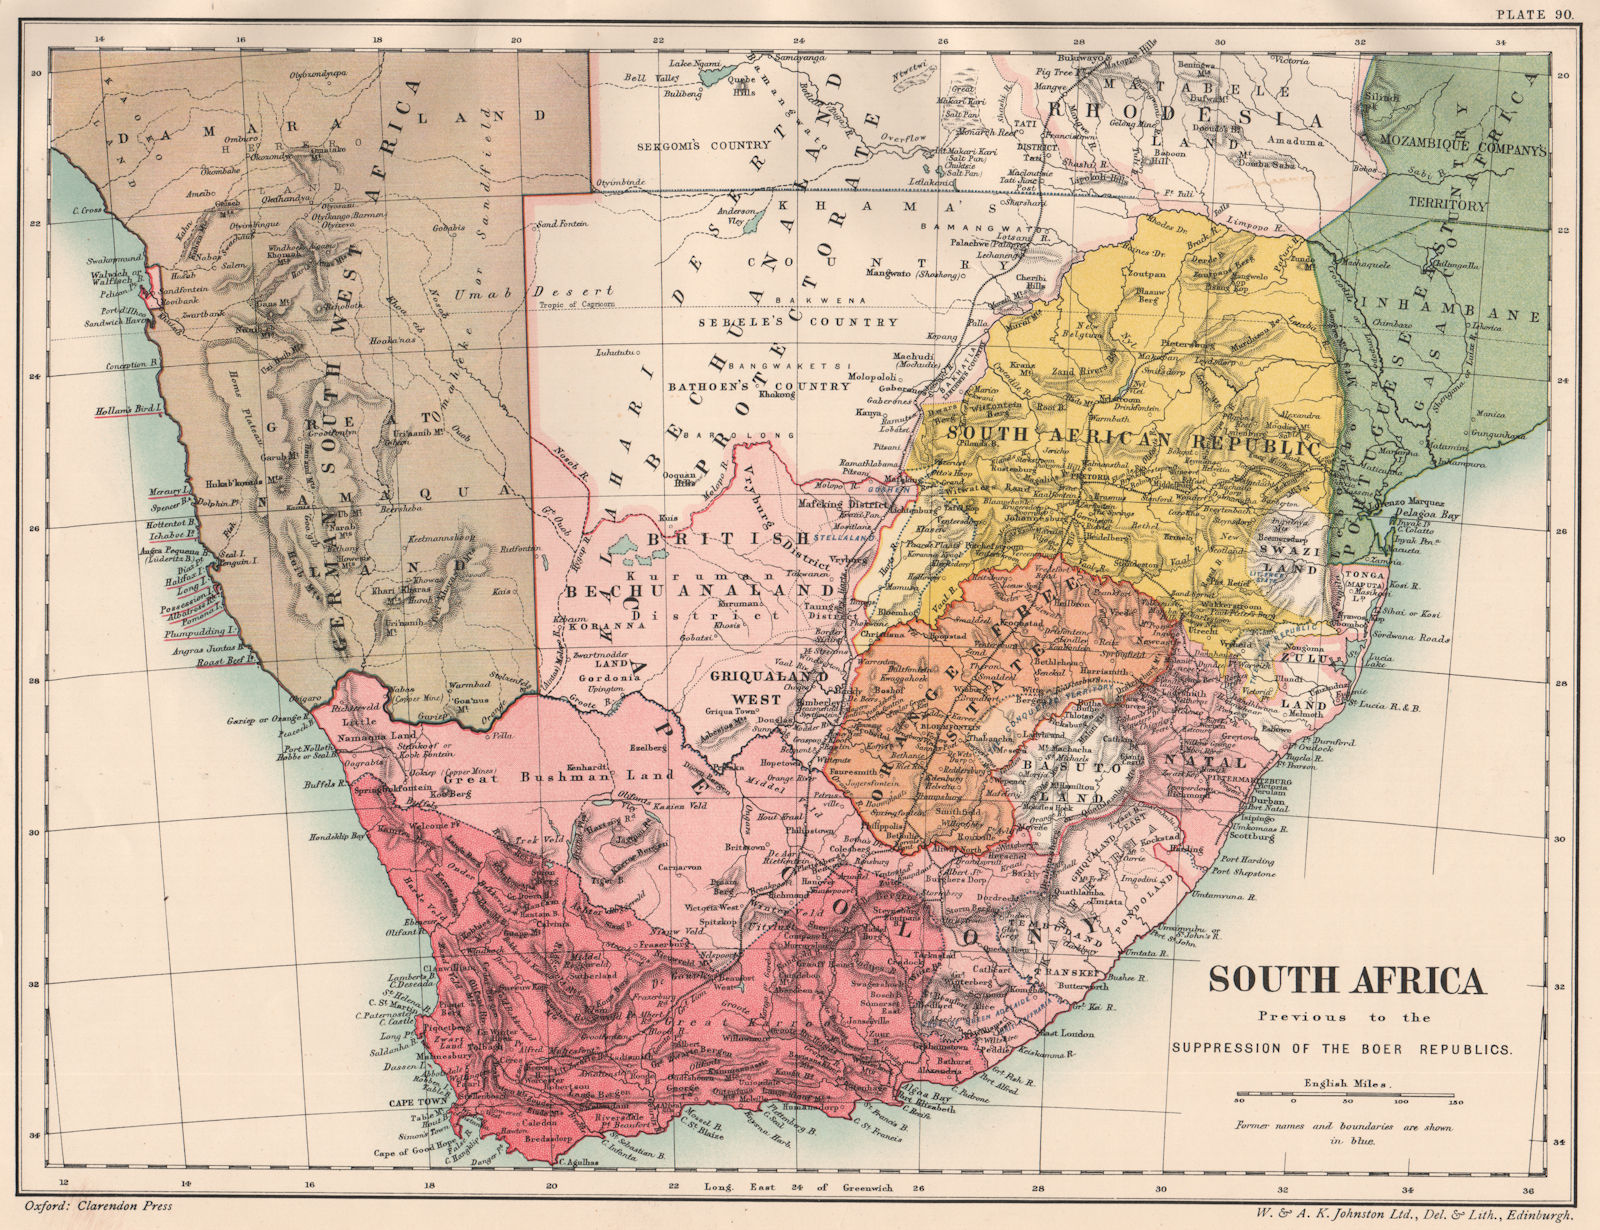 Associate Product SOUTH AFRICA. Before the Boer wars & suppression of the Boer states 1902 map